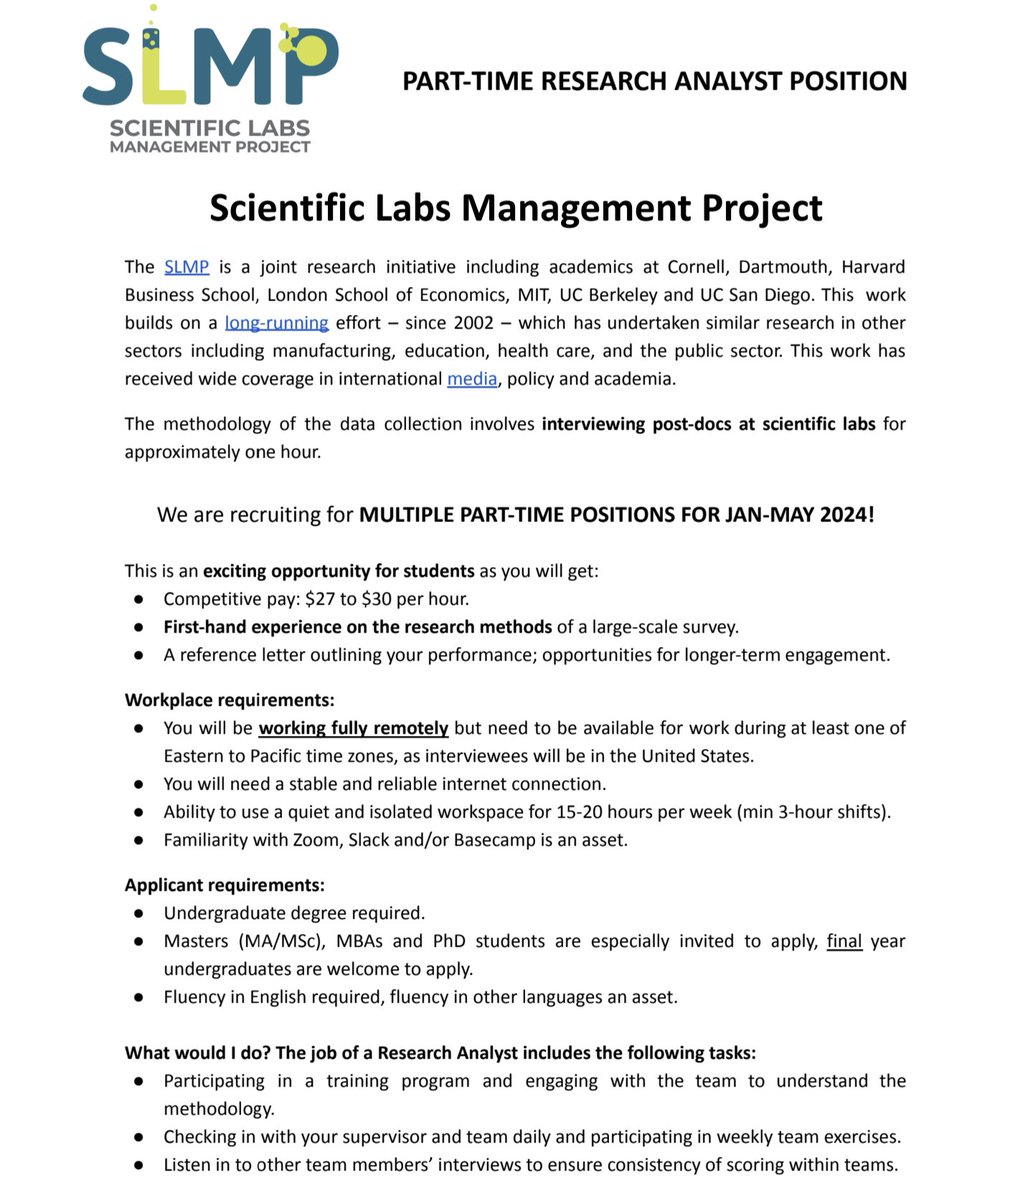 🚨Come work with us!! 🚨 We are hiring *part time RAs* (15-20hrs/wk) to interview research labs and learn about their management practices. Fully remote from anywhere in the US or Canada. APPLY HERE: labsmanagement.org/apply Please RT and send to your best grad students!